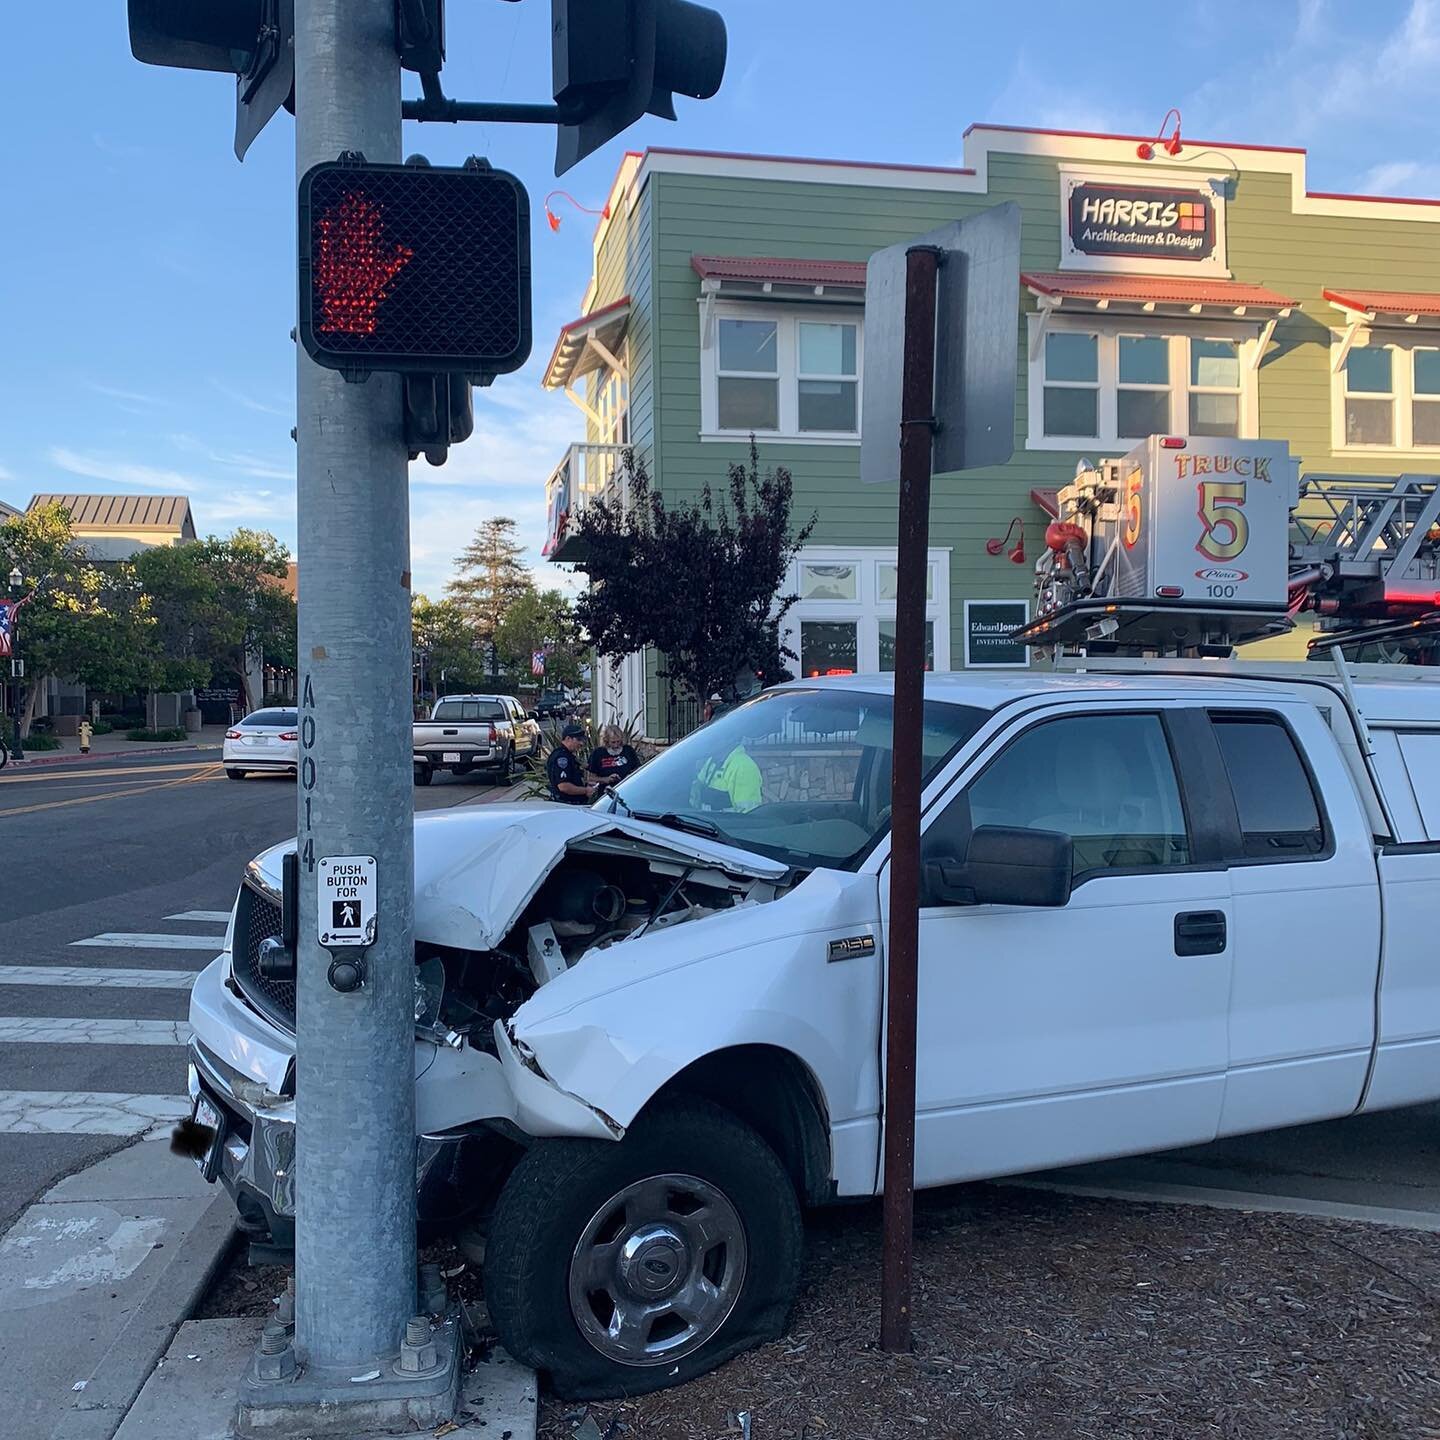 FCFA responded to a vehicle into a traffic signal Traffic Way/W Branch Arroyo Grande. Thankfully non-injury. #5citiesfire #arroyograndecity